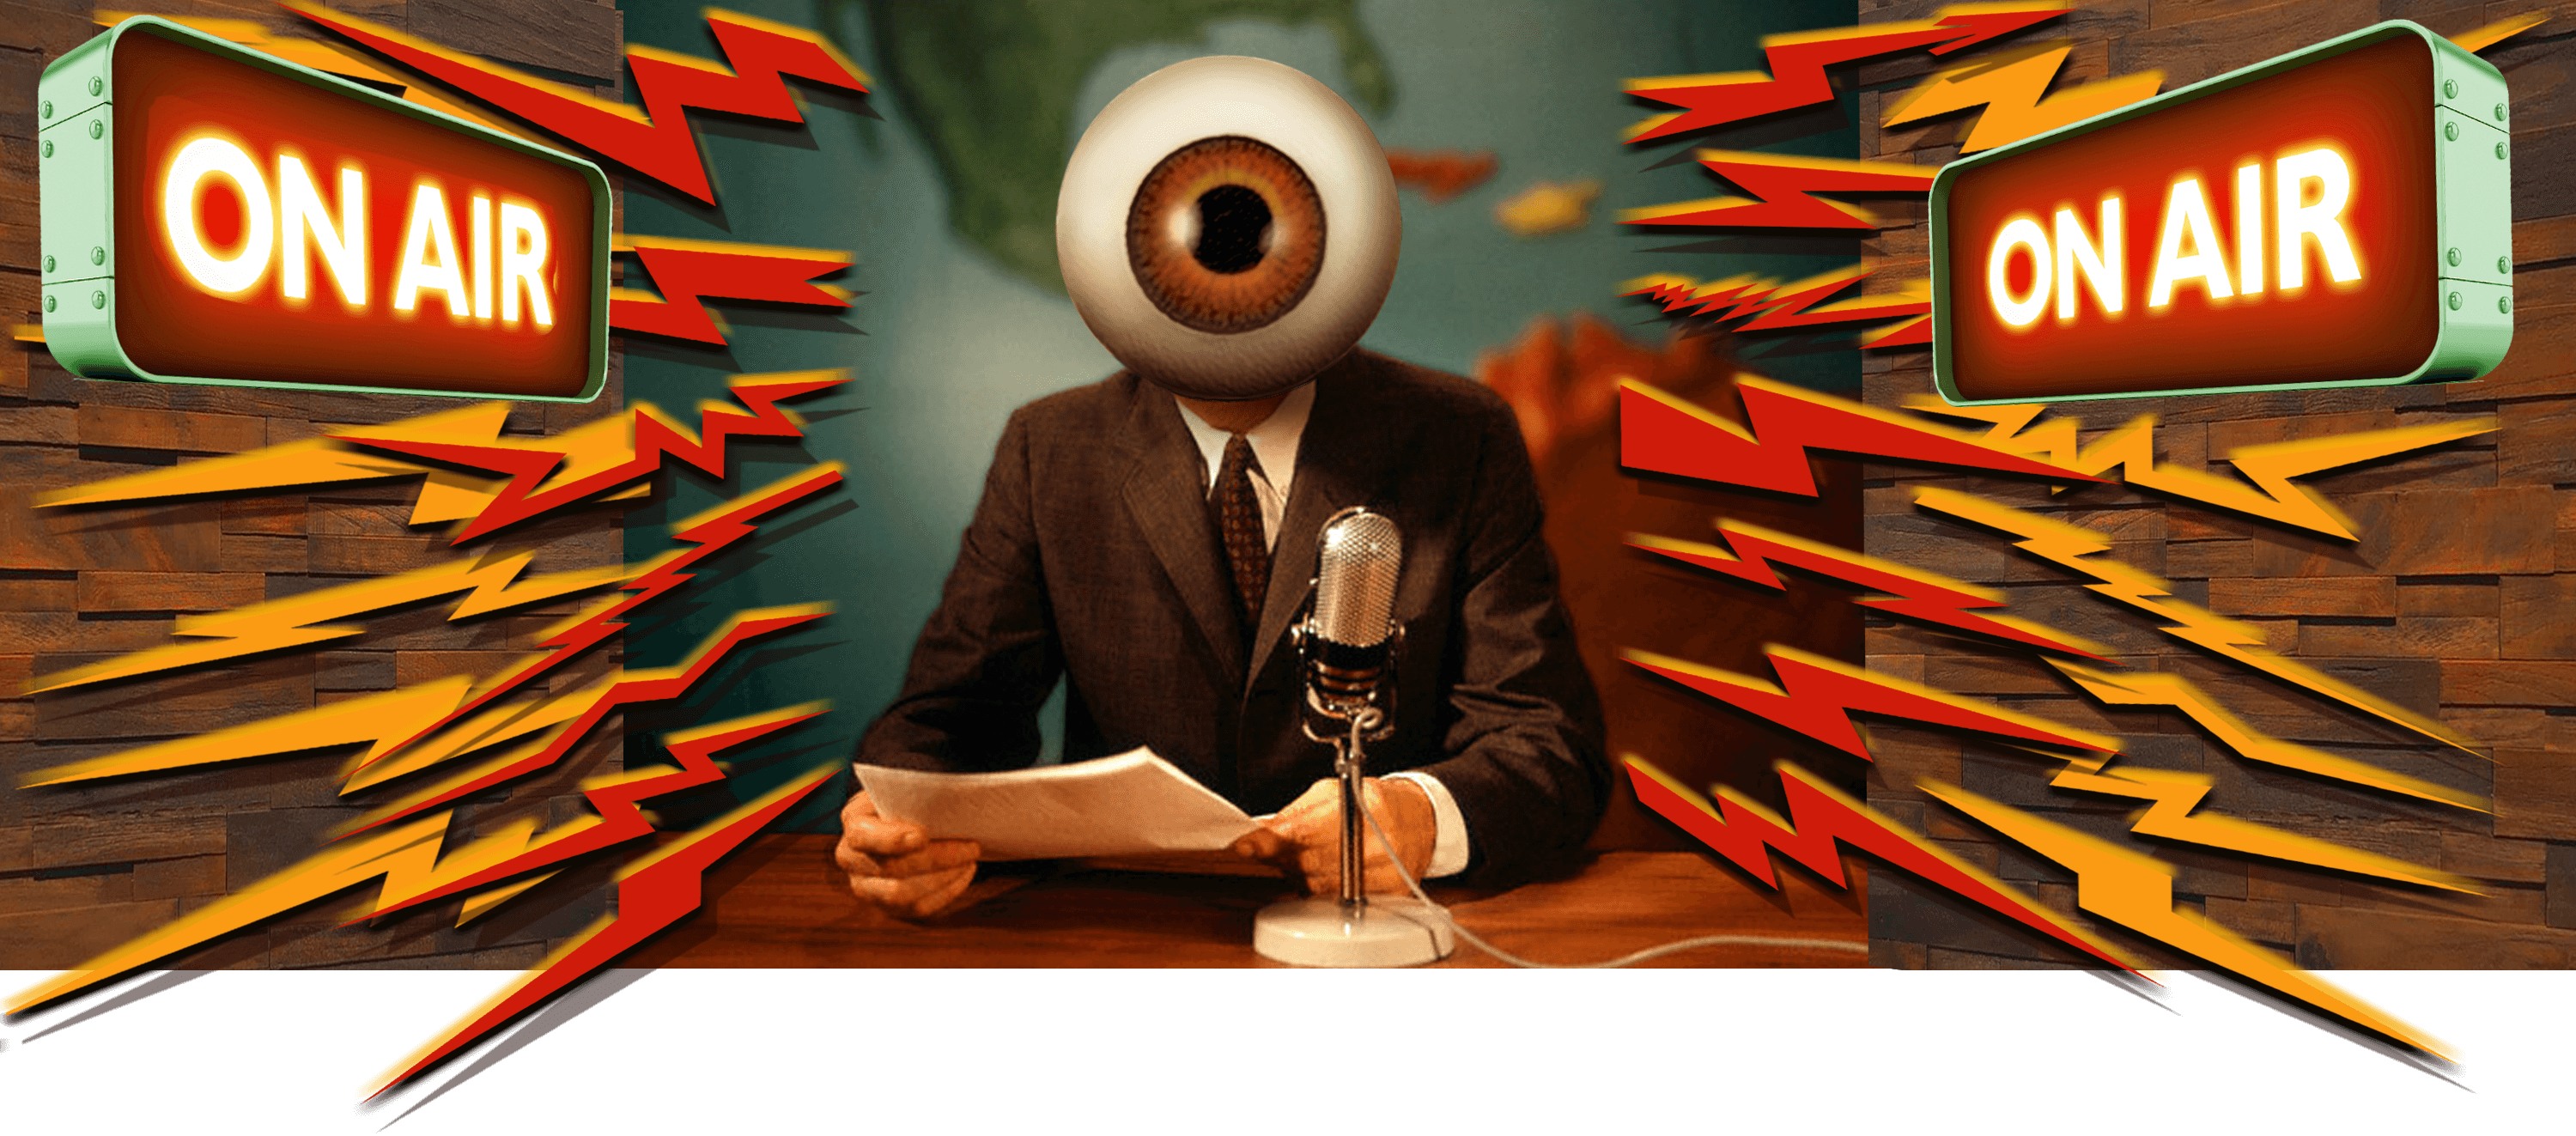 Illustration of vintage newscaster with eyeball head, with red lightning bolts on either side